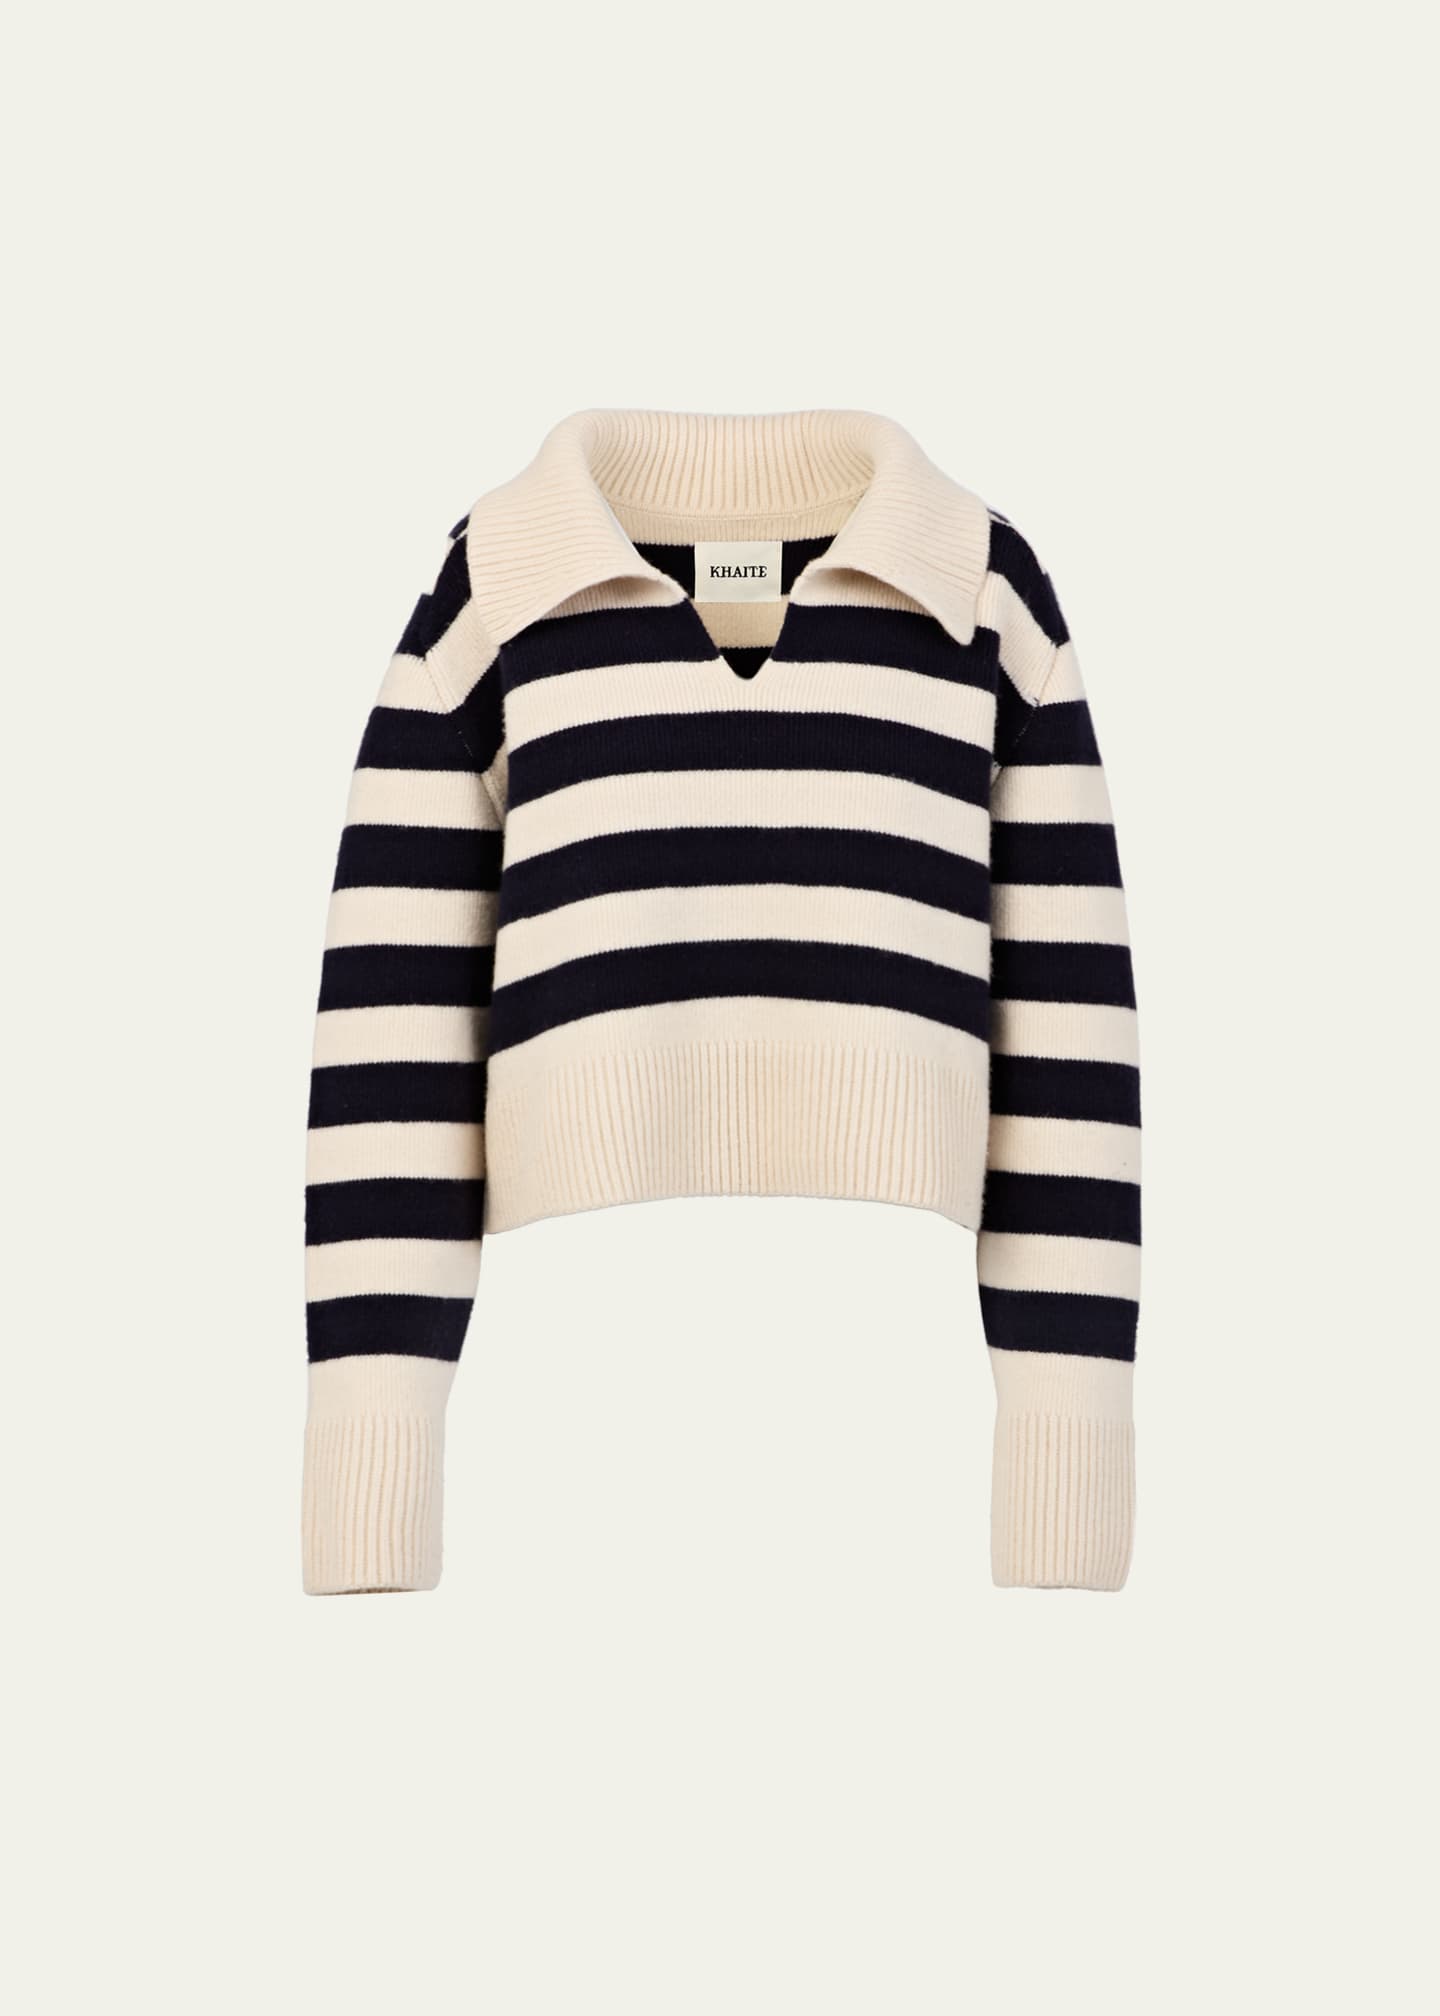 Oversized, wool and cashmere sweater with black and white stripes